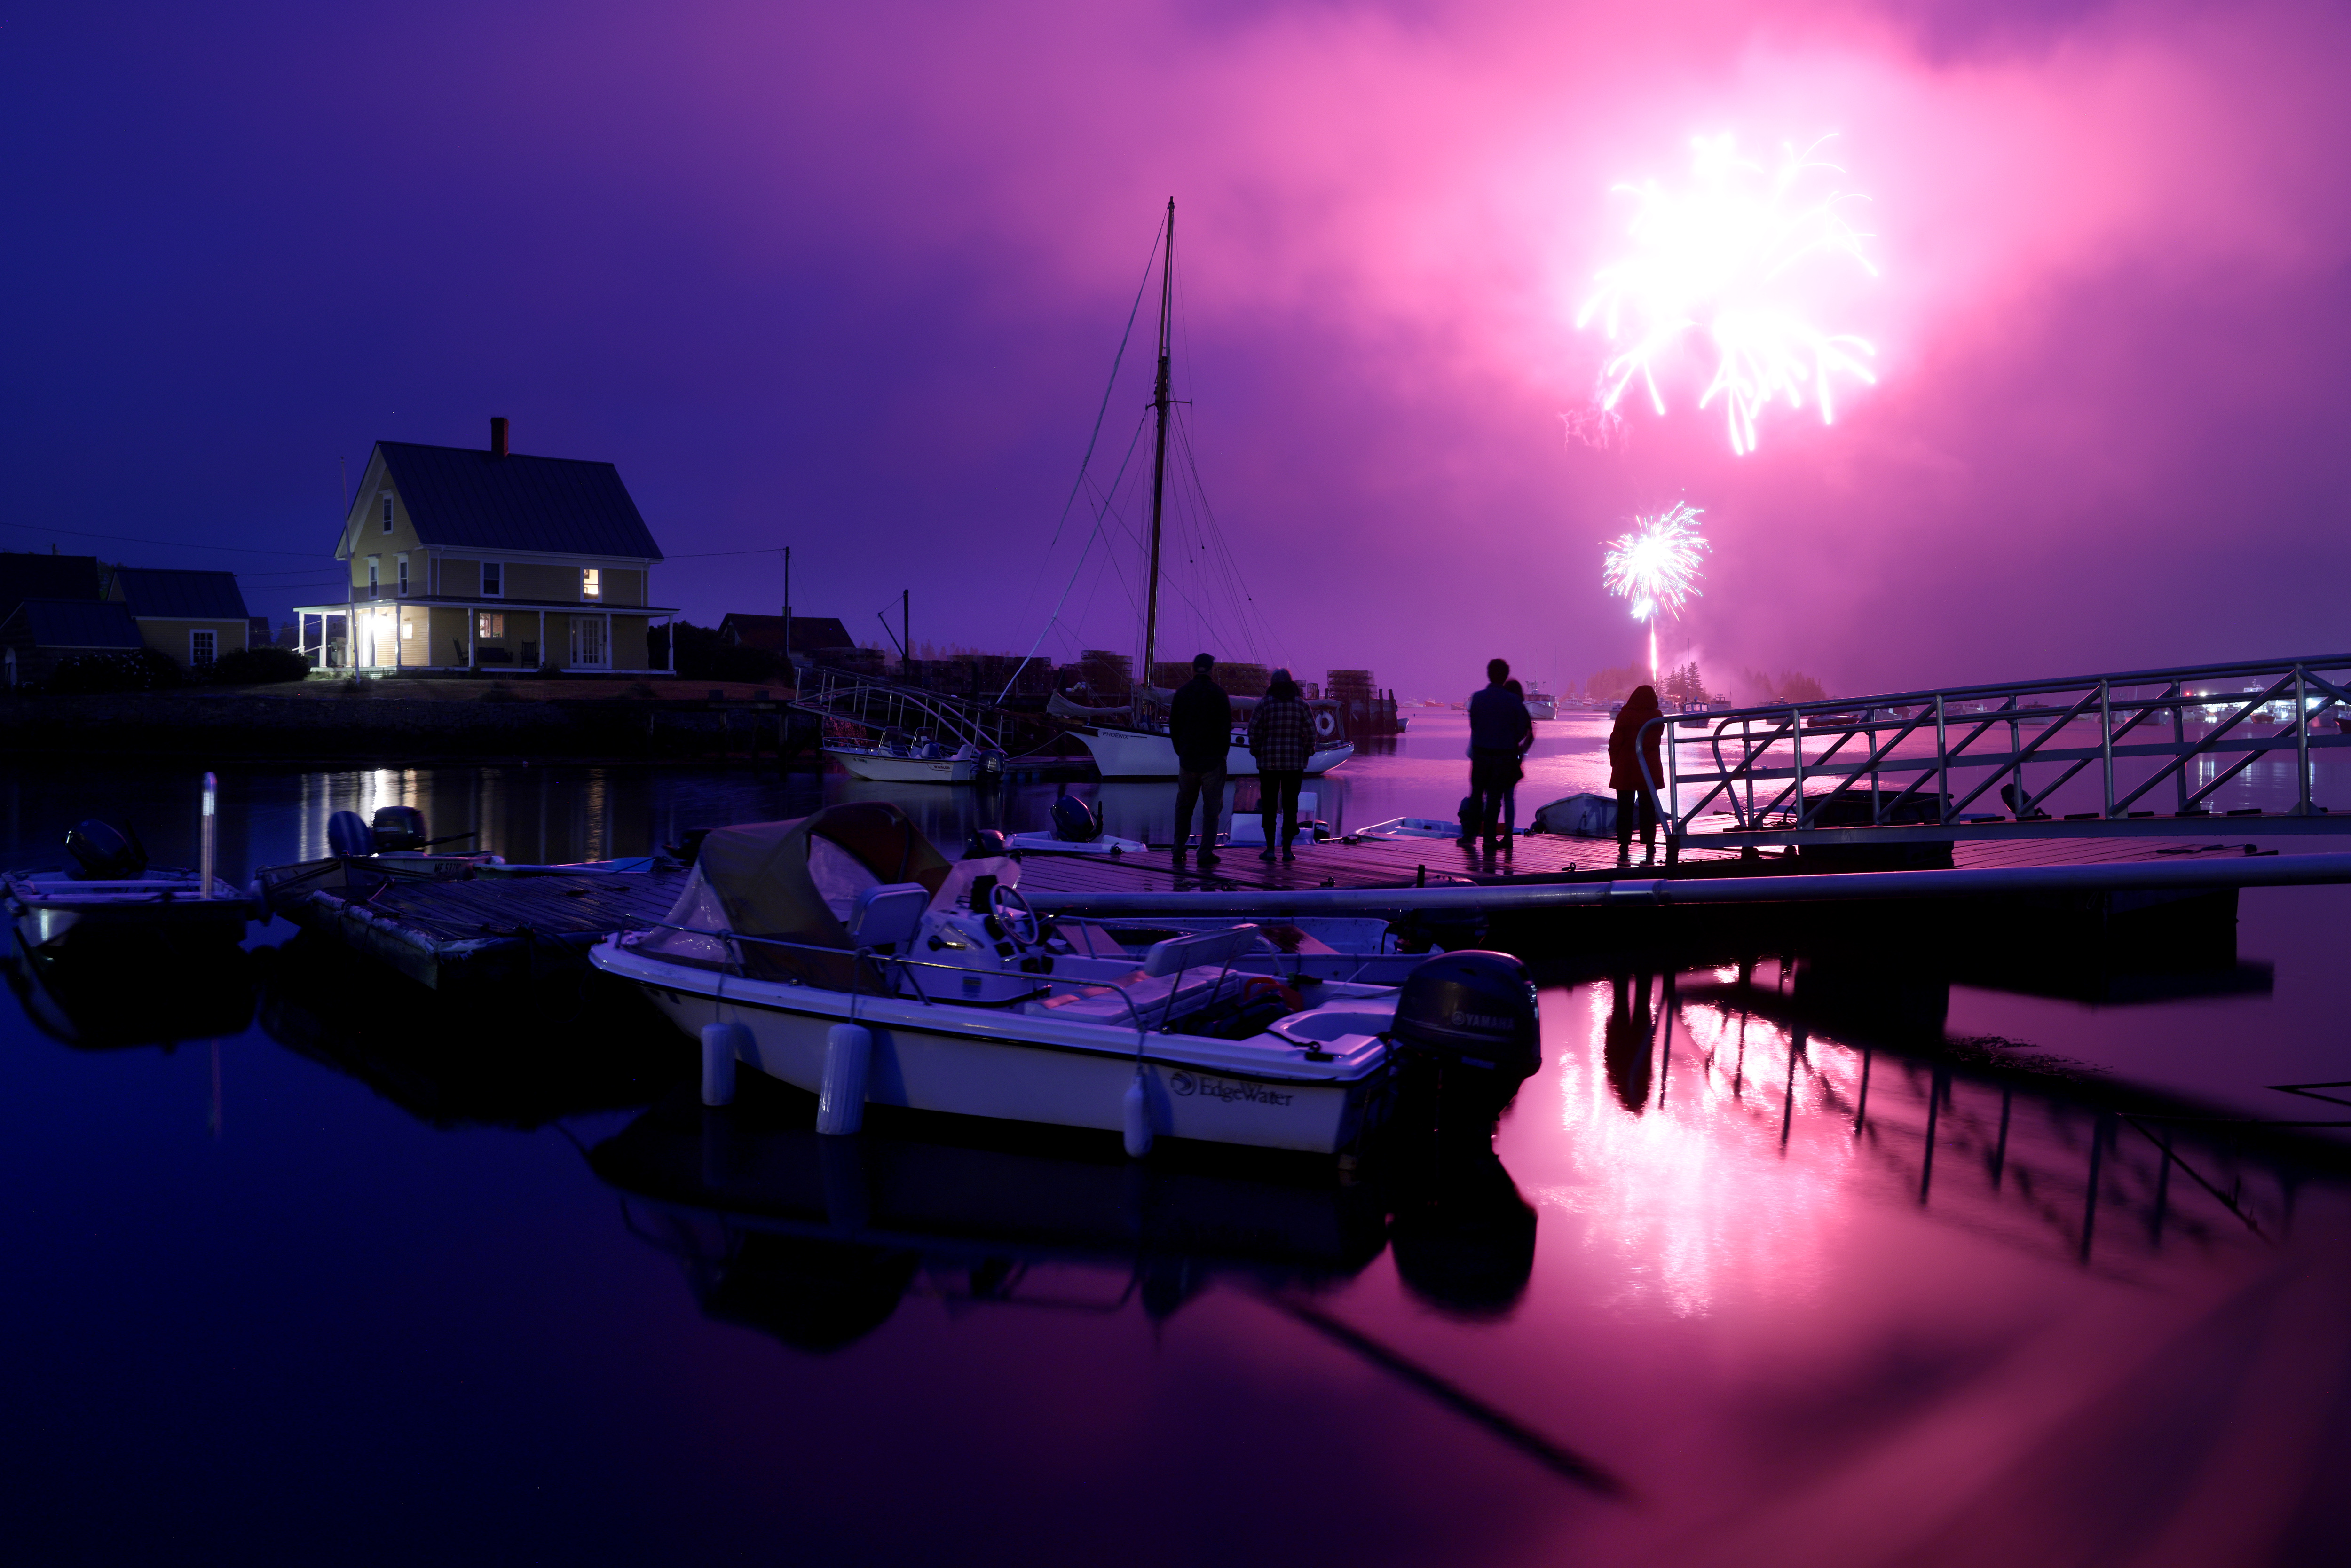 People ventured out onto a dock to take in the Fourth of July fireworks as they exploded over Carvers Harbor in Vinalhaven.
